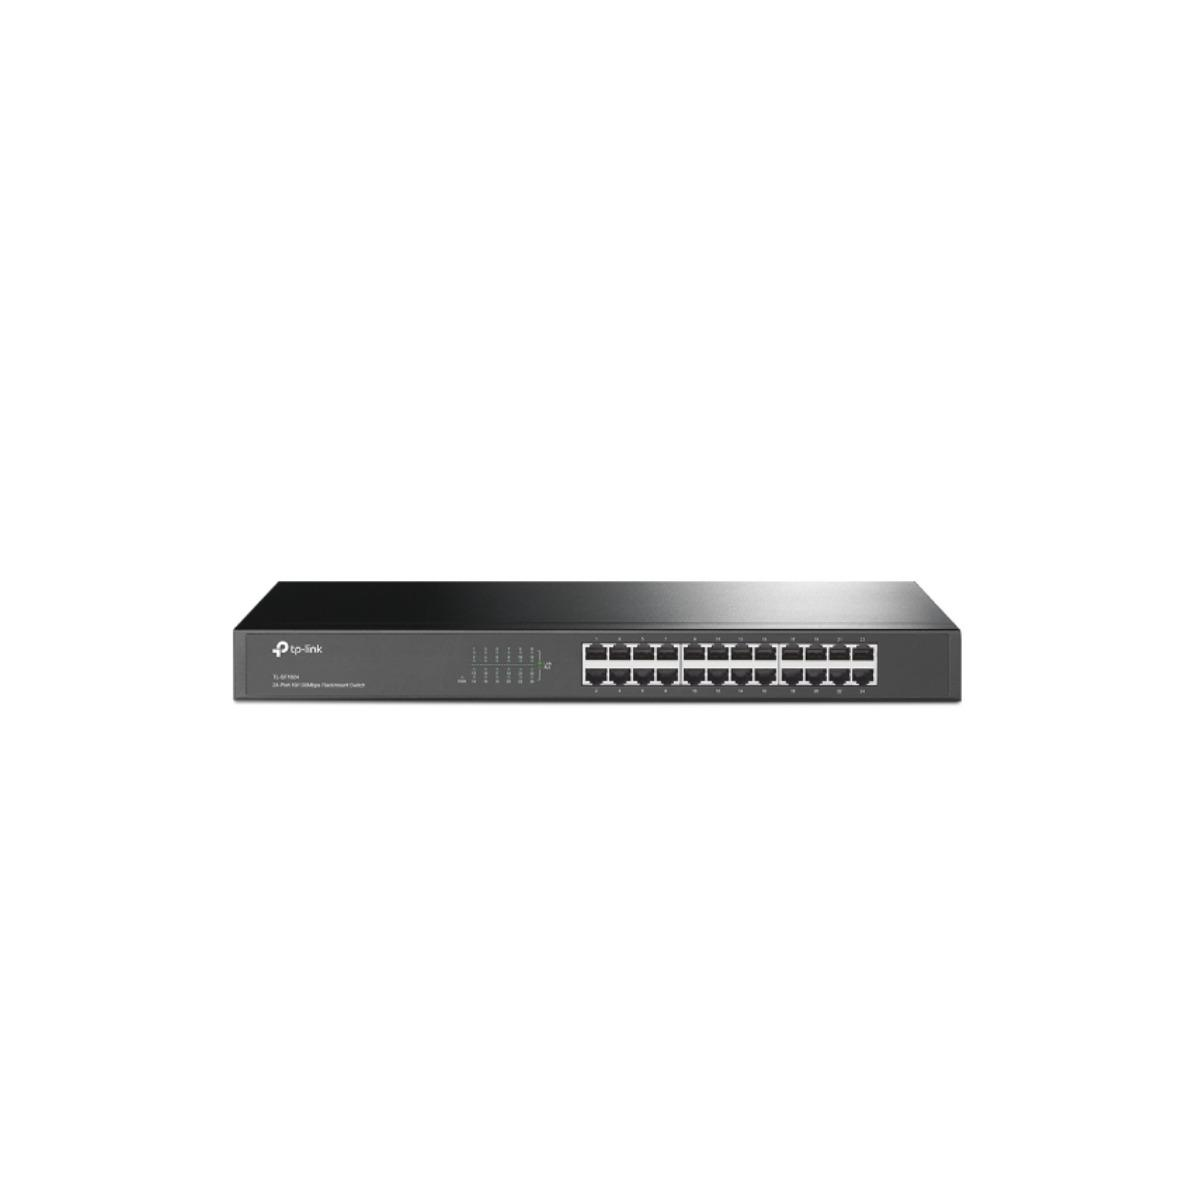 TP-LINK 24 24-Port-10/100Mbit/s-Rackmount-Switch TL-SF1024 Switch TP-Link